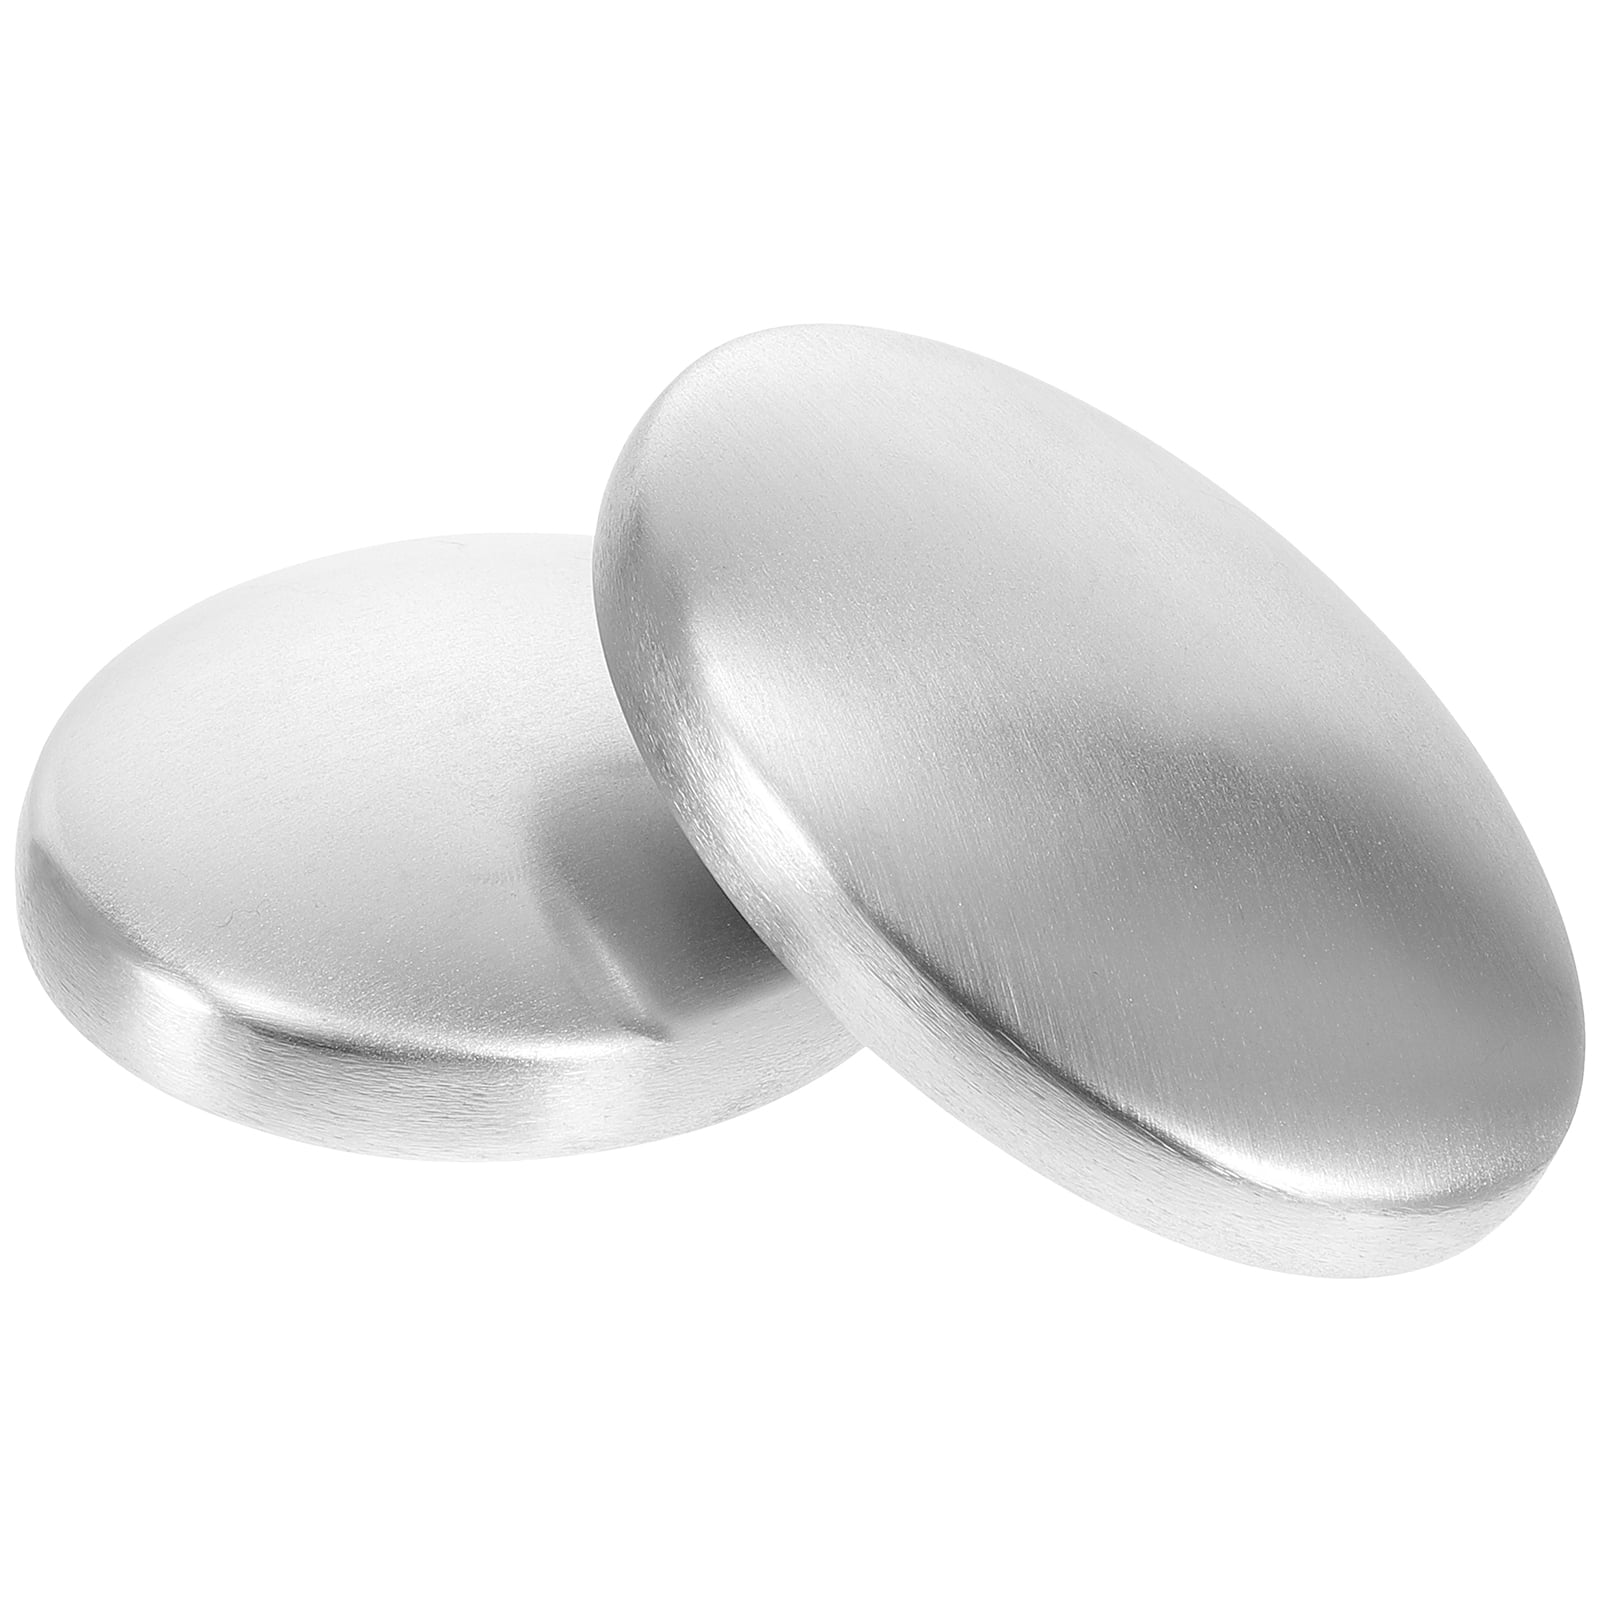 Stainless Steel Soap: A Unique Solution for Kitchen Odors - Magnets USA